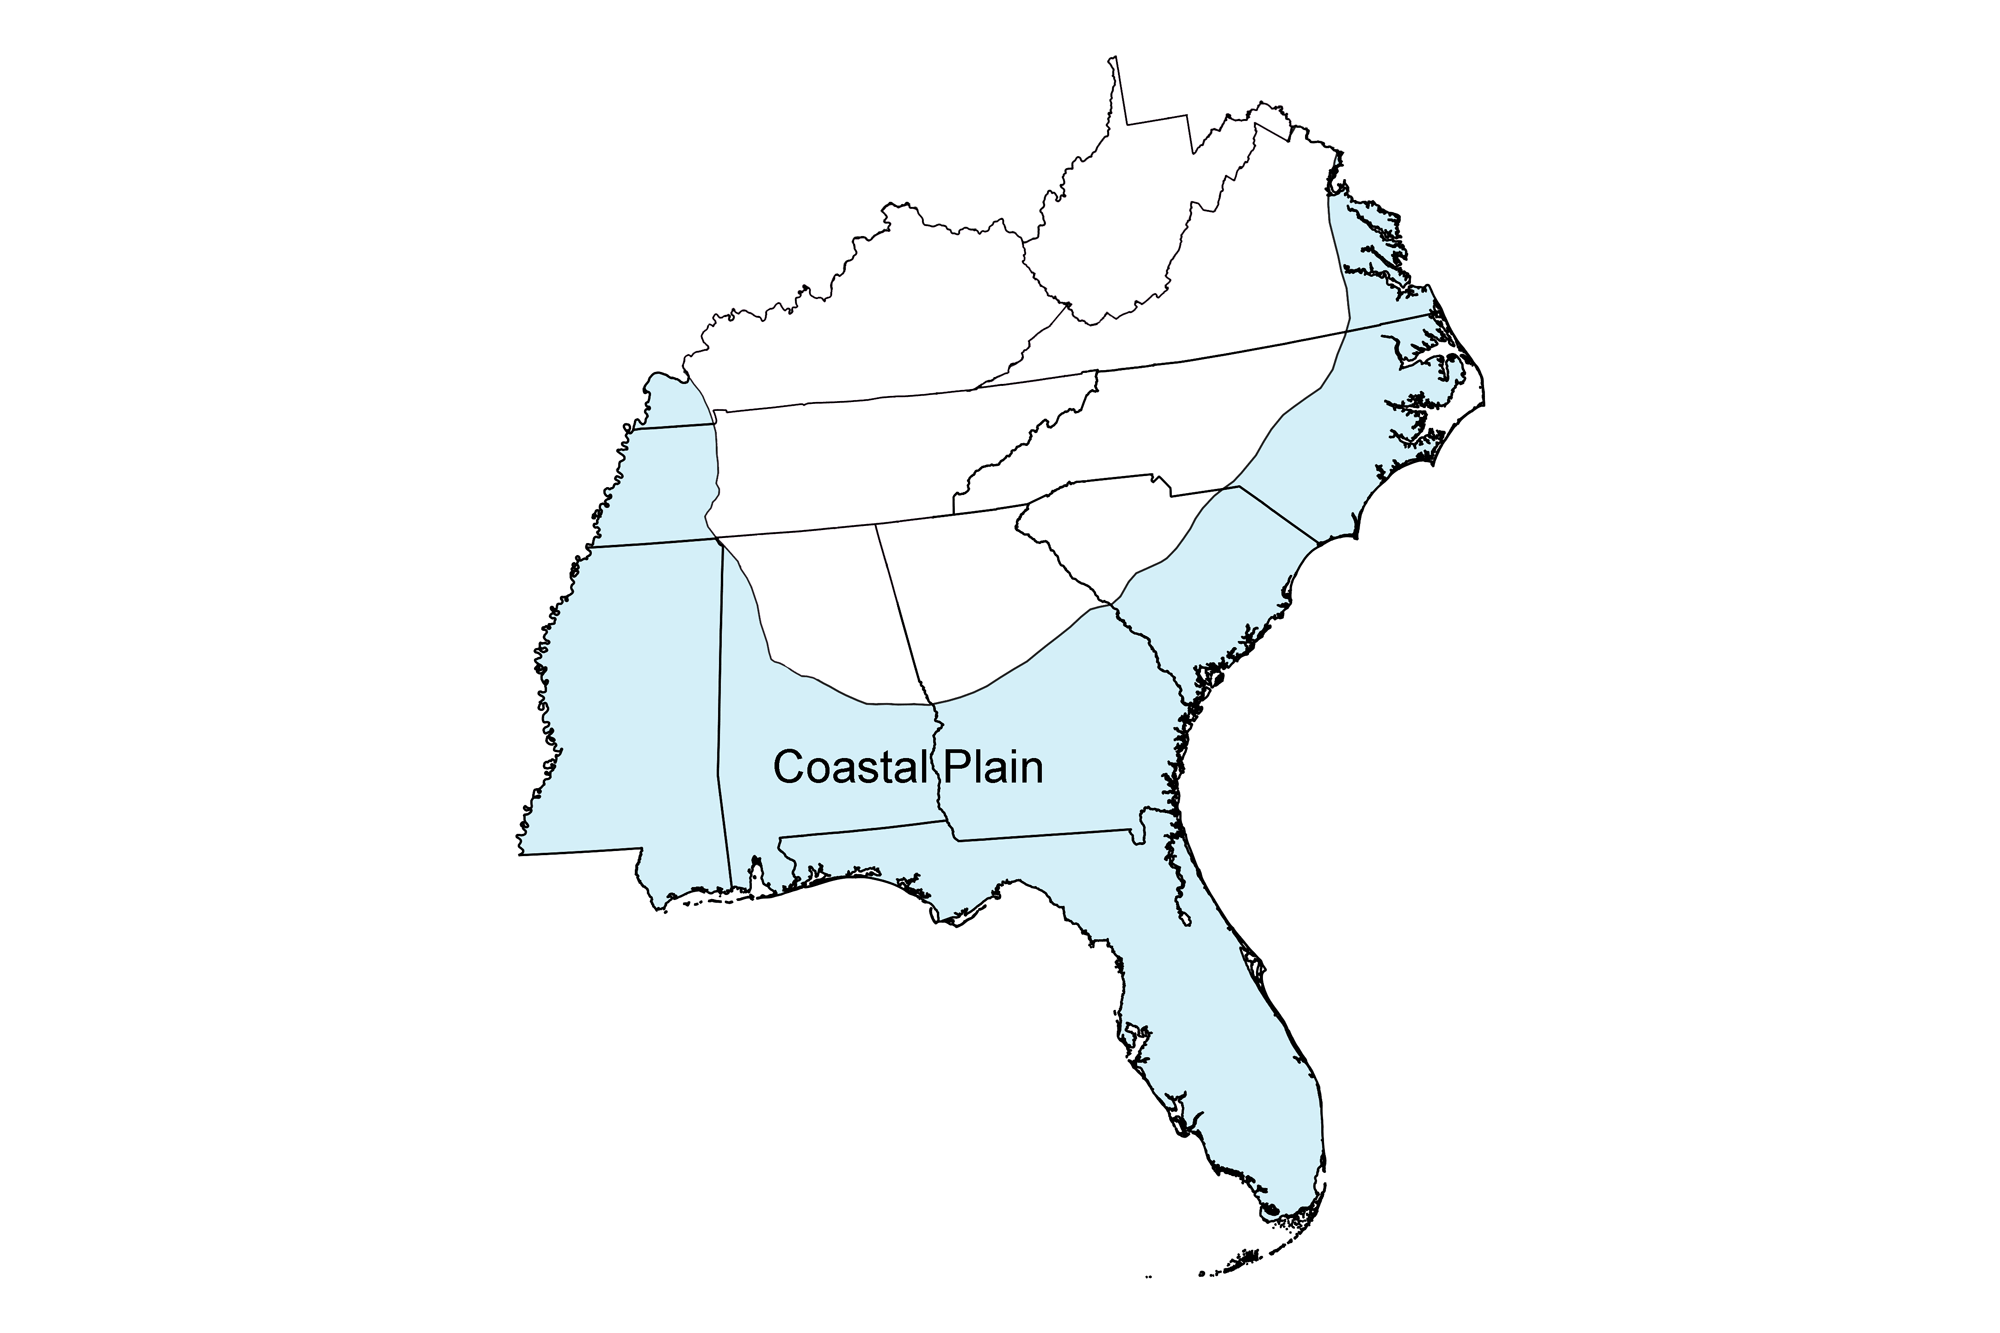 Simple map that shows the Coastal Plain region of the southeastern United States.